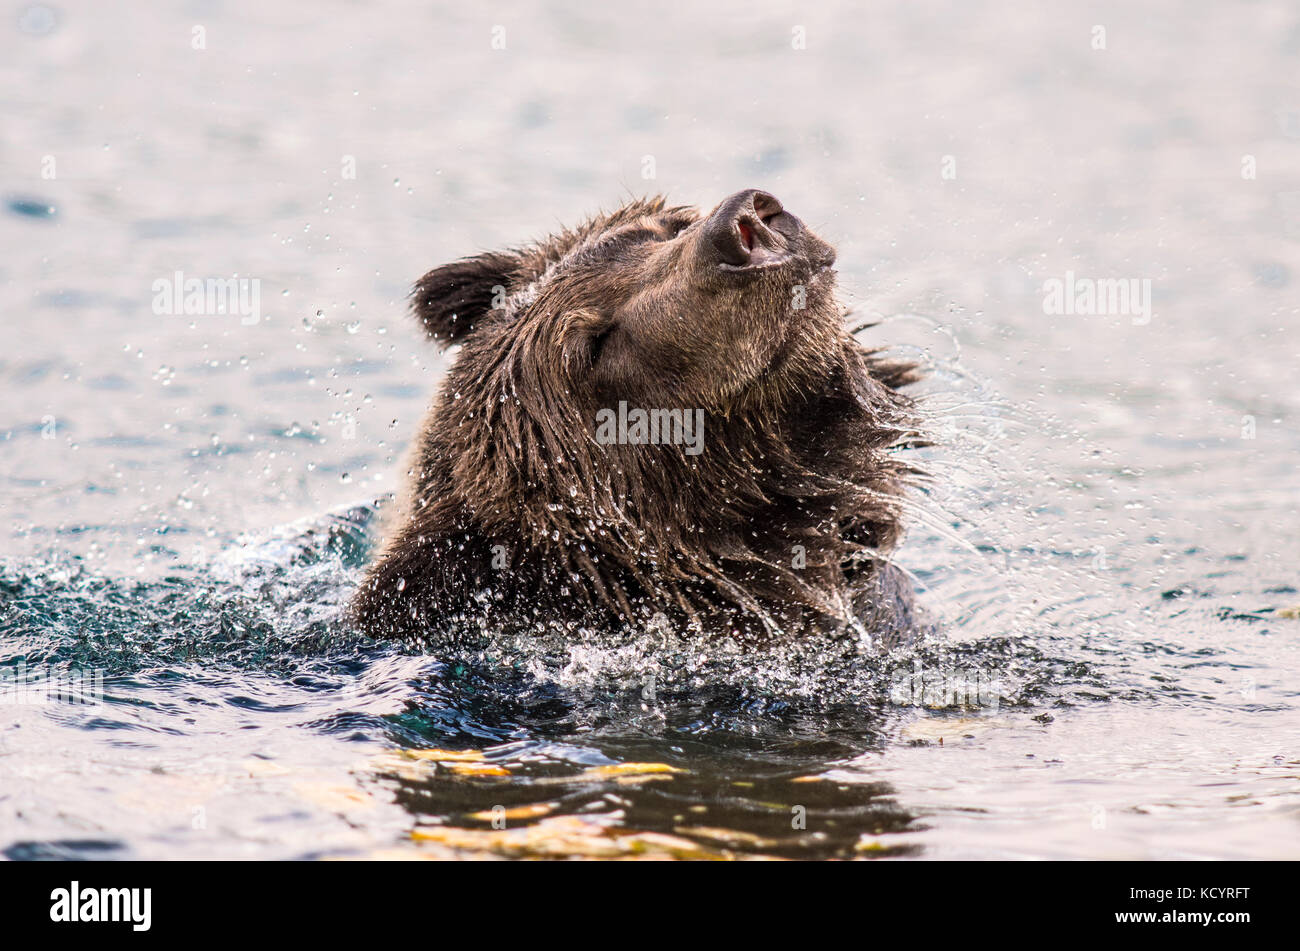 Grizzly Bear (Ursus arctos horribilis), Adult, Fall, Autumn, in water of salmon stream giving a head shake, Central British Columbia, Canada Stock Photo